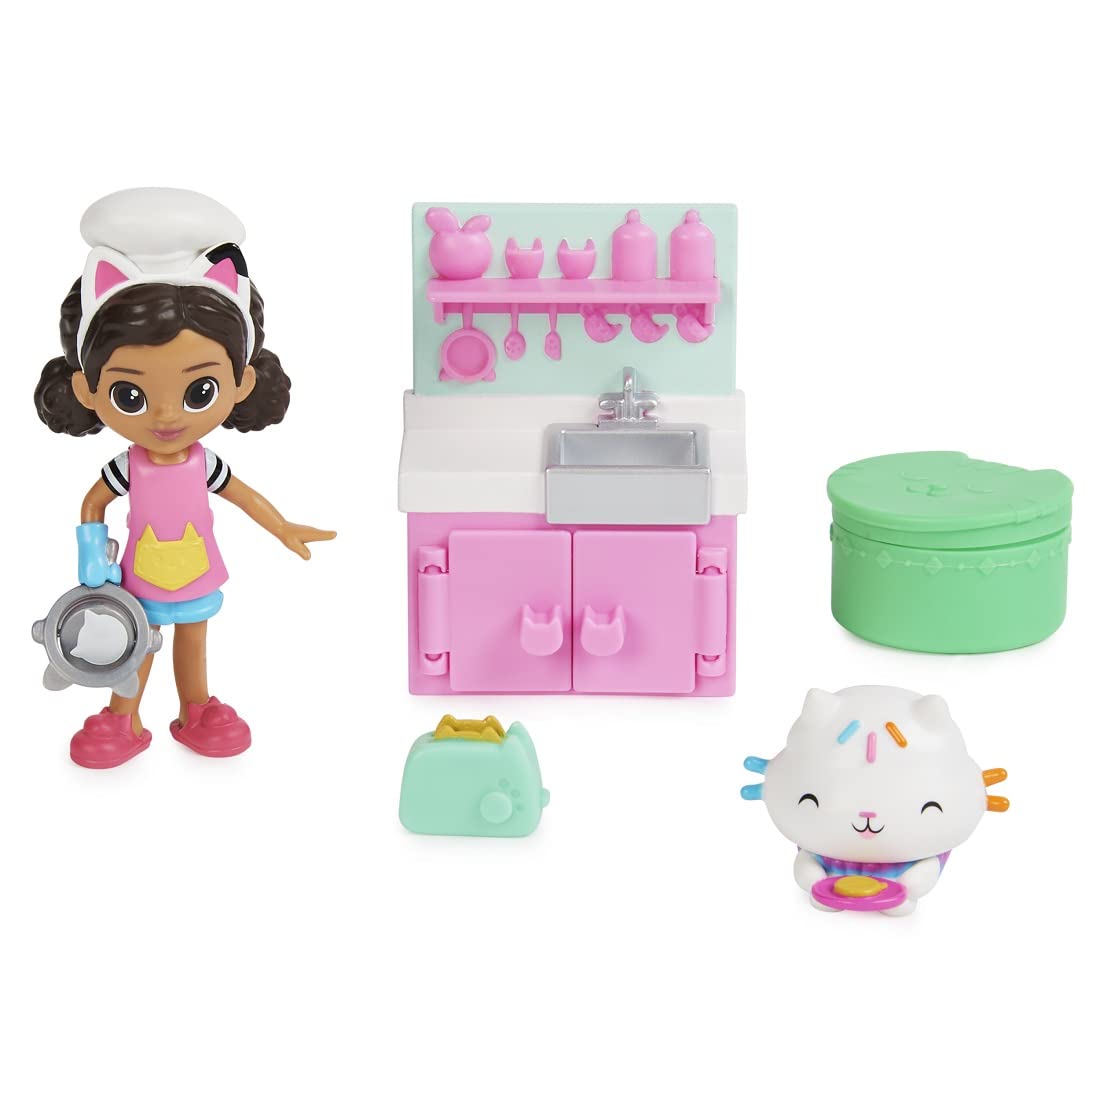 5-Piece Gabby’s Dollhouse Lunch and Munch Kitchen Set w/ 2 Toy Figures & Accessories $3.93 + Free Shipping w/ Prime or on $35+